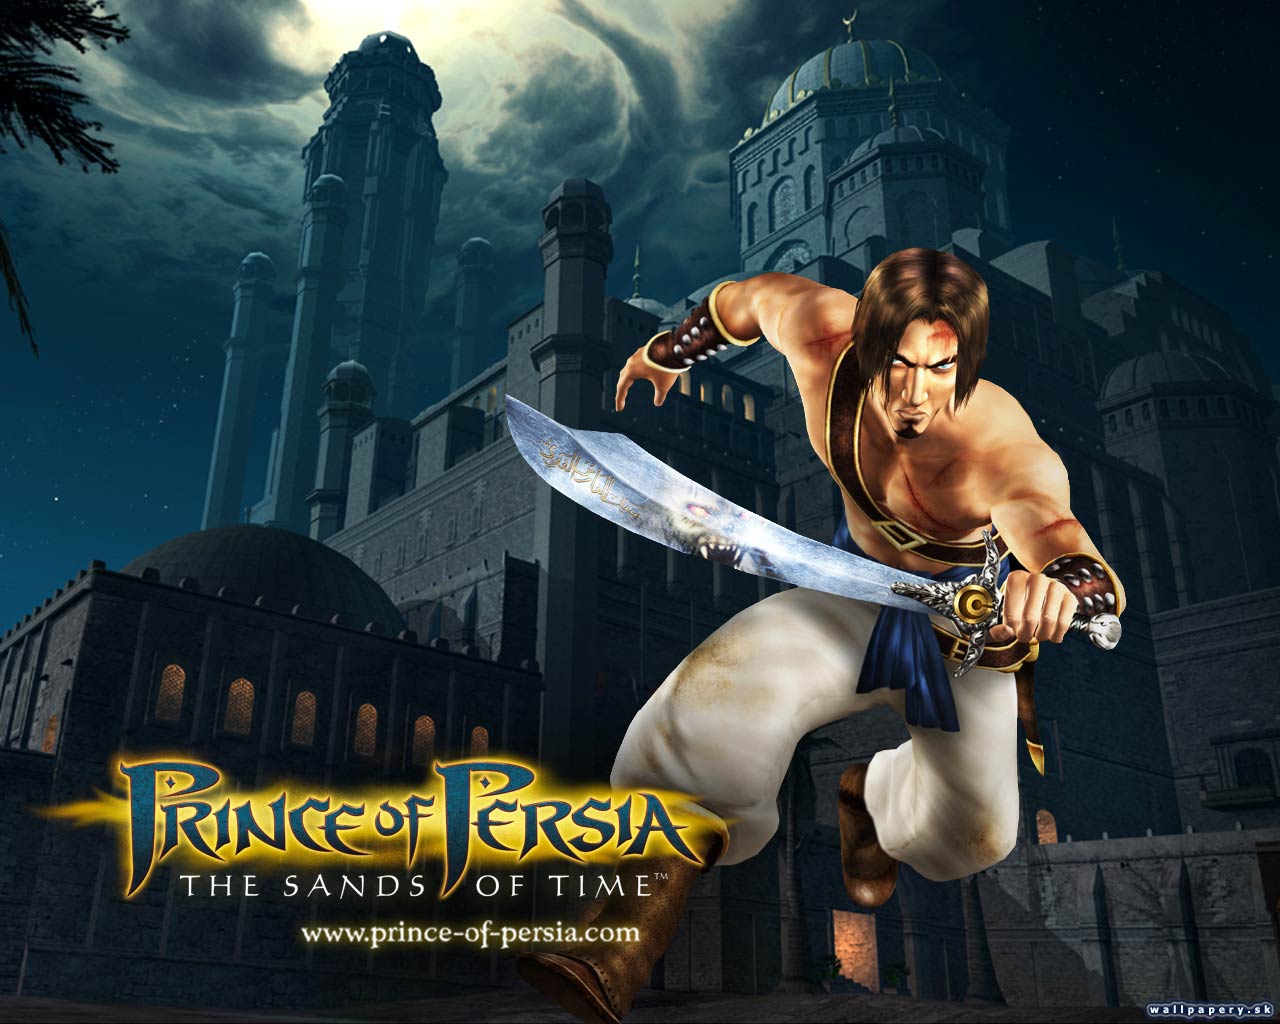 Prince of Persia: The Sands of Time - wallpaper 13